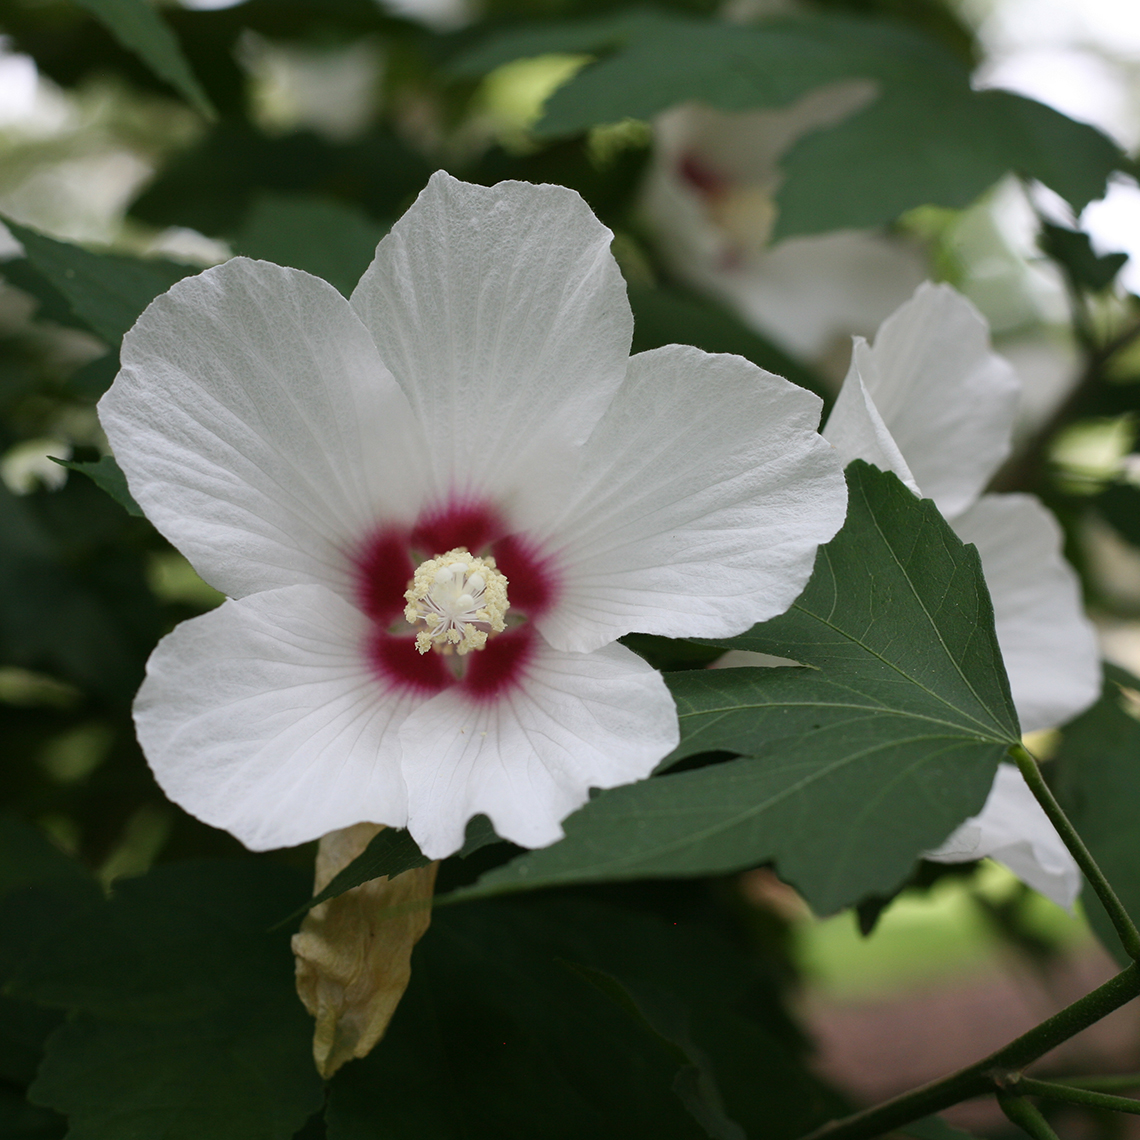 Closeup of the white bloom of Lohengrin hibiscus with a dark pink eye in the center